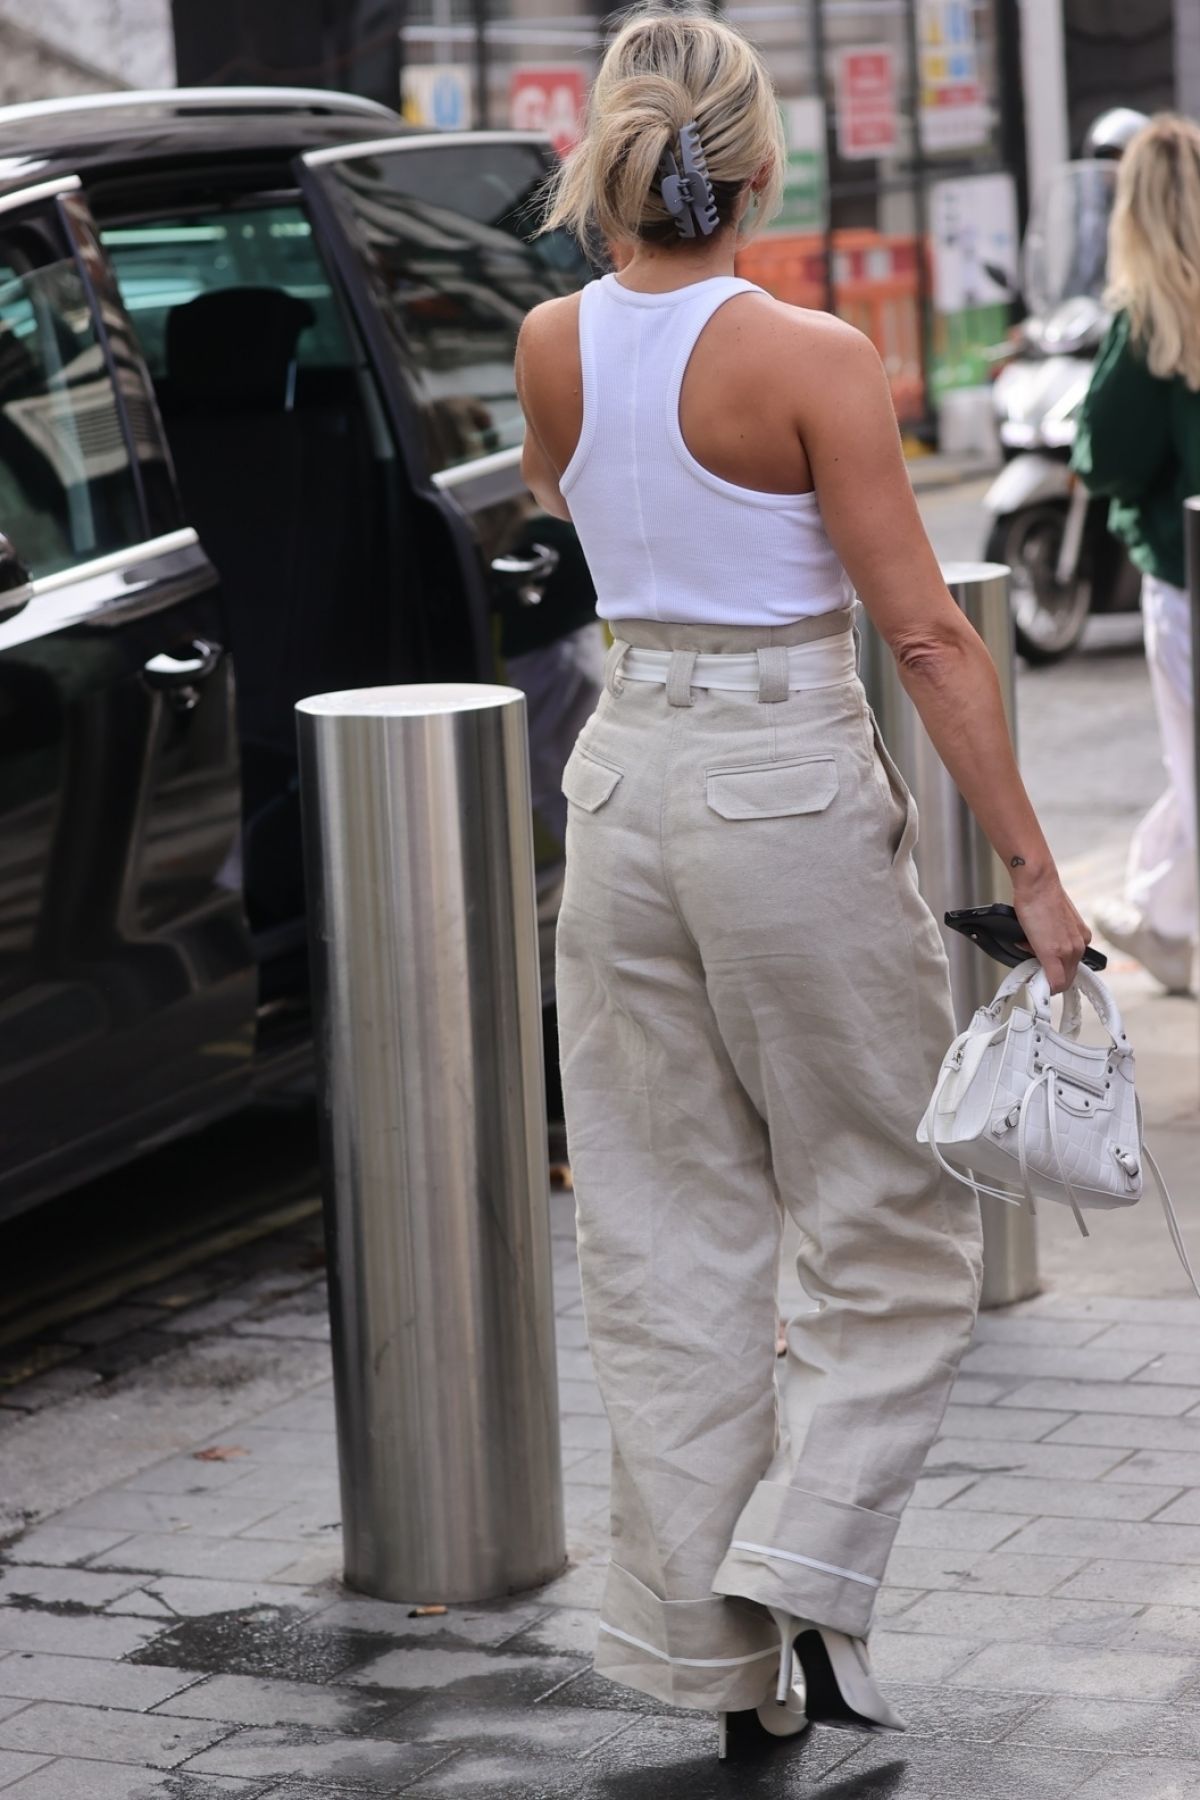 Ashley Roberts in White Top and Cargo Pants at Heart Breakfast Show in London 1